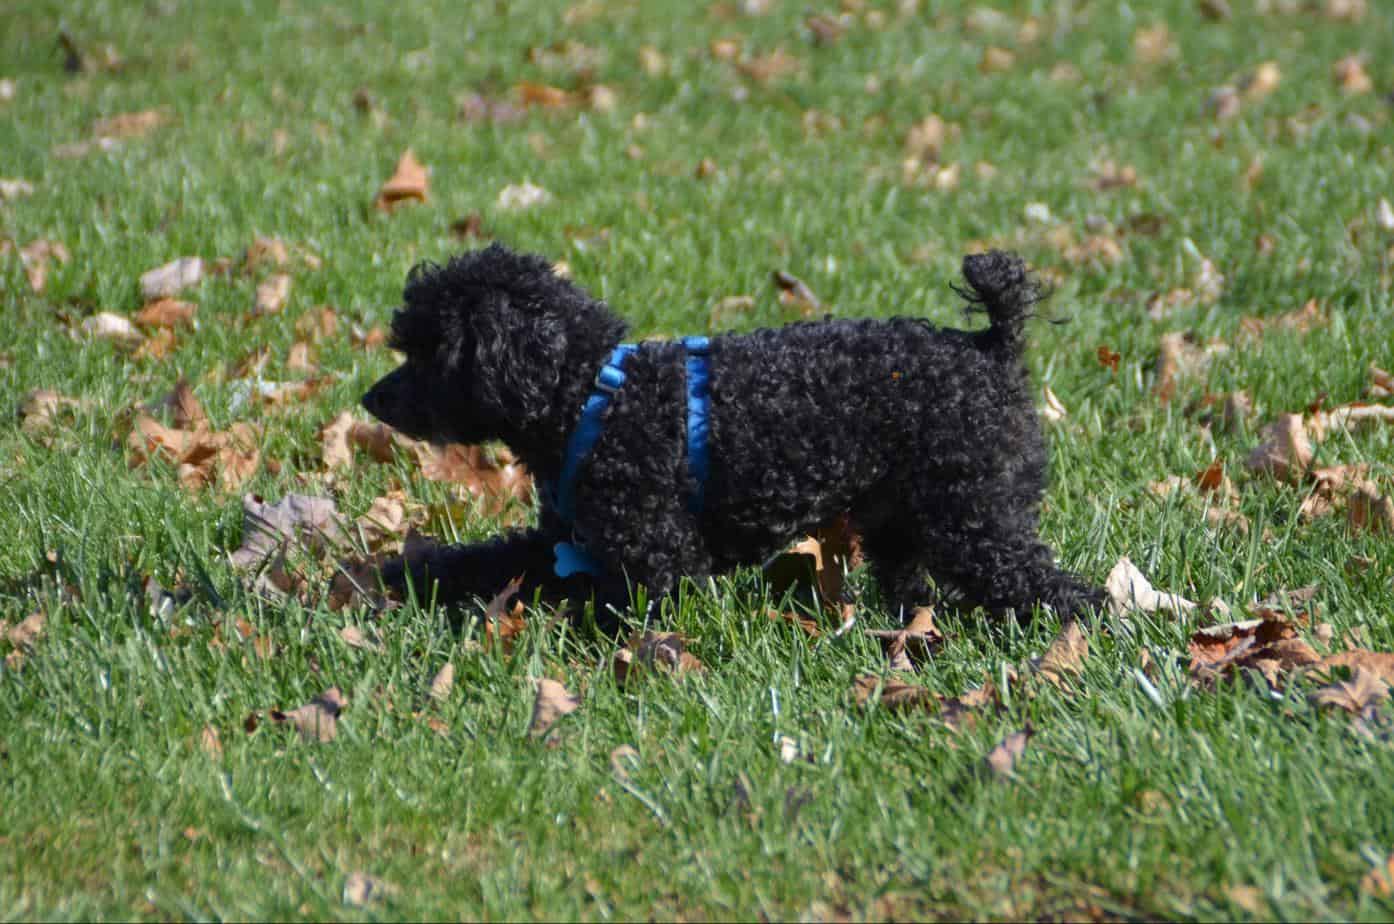 teacup poodle full grown size